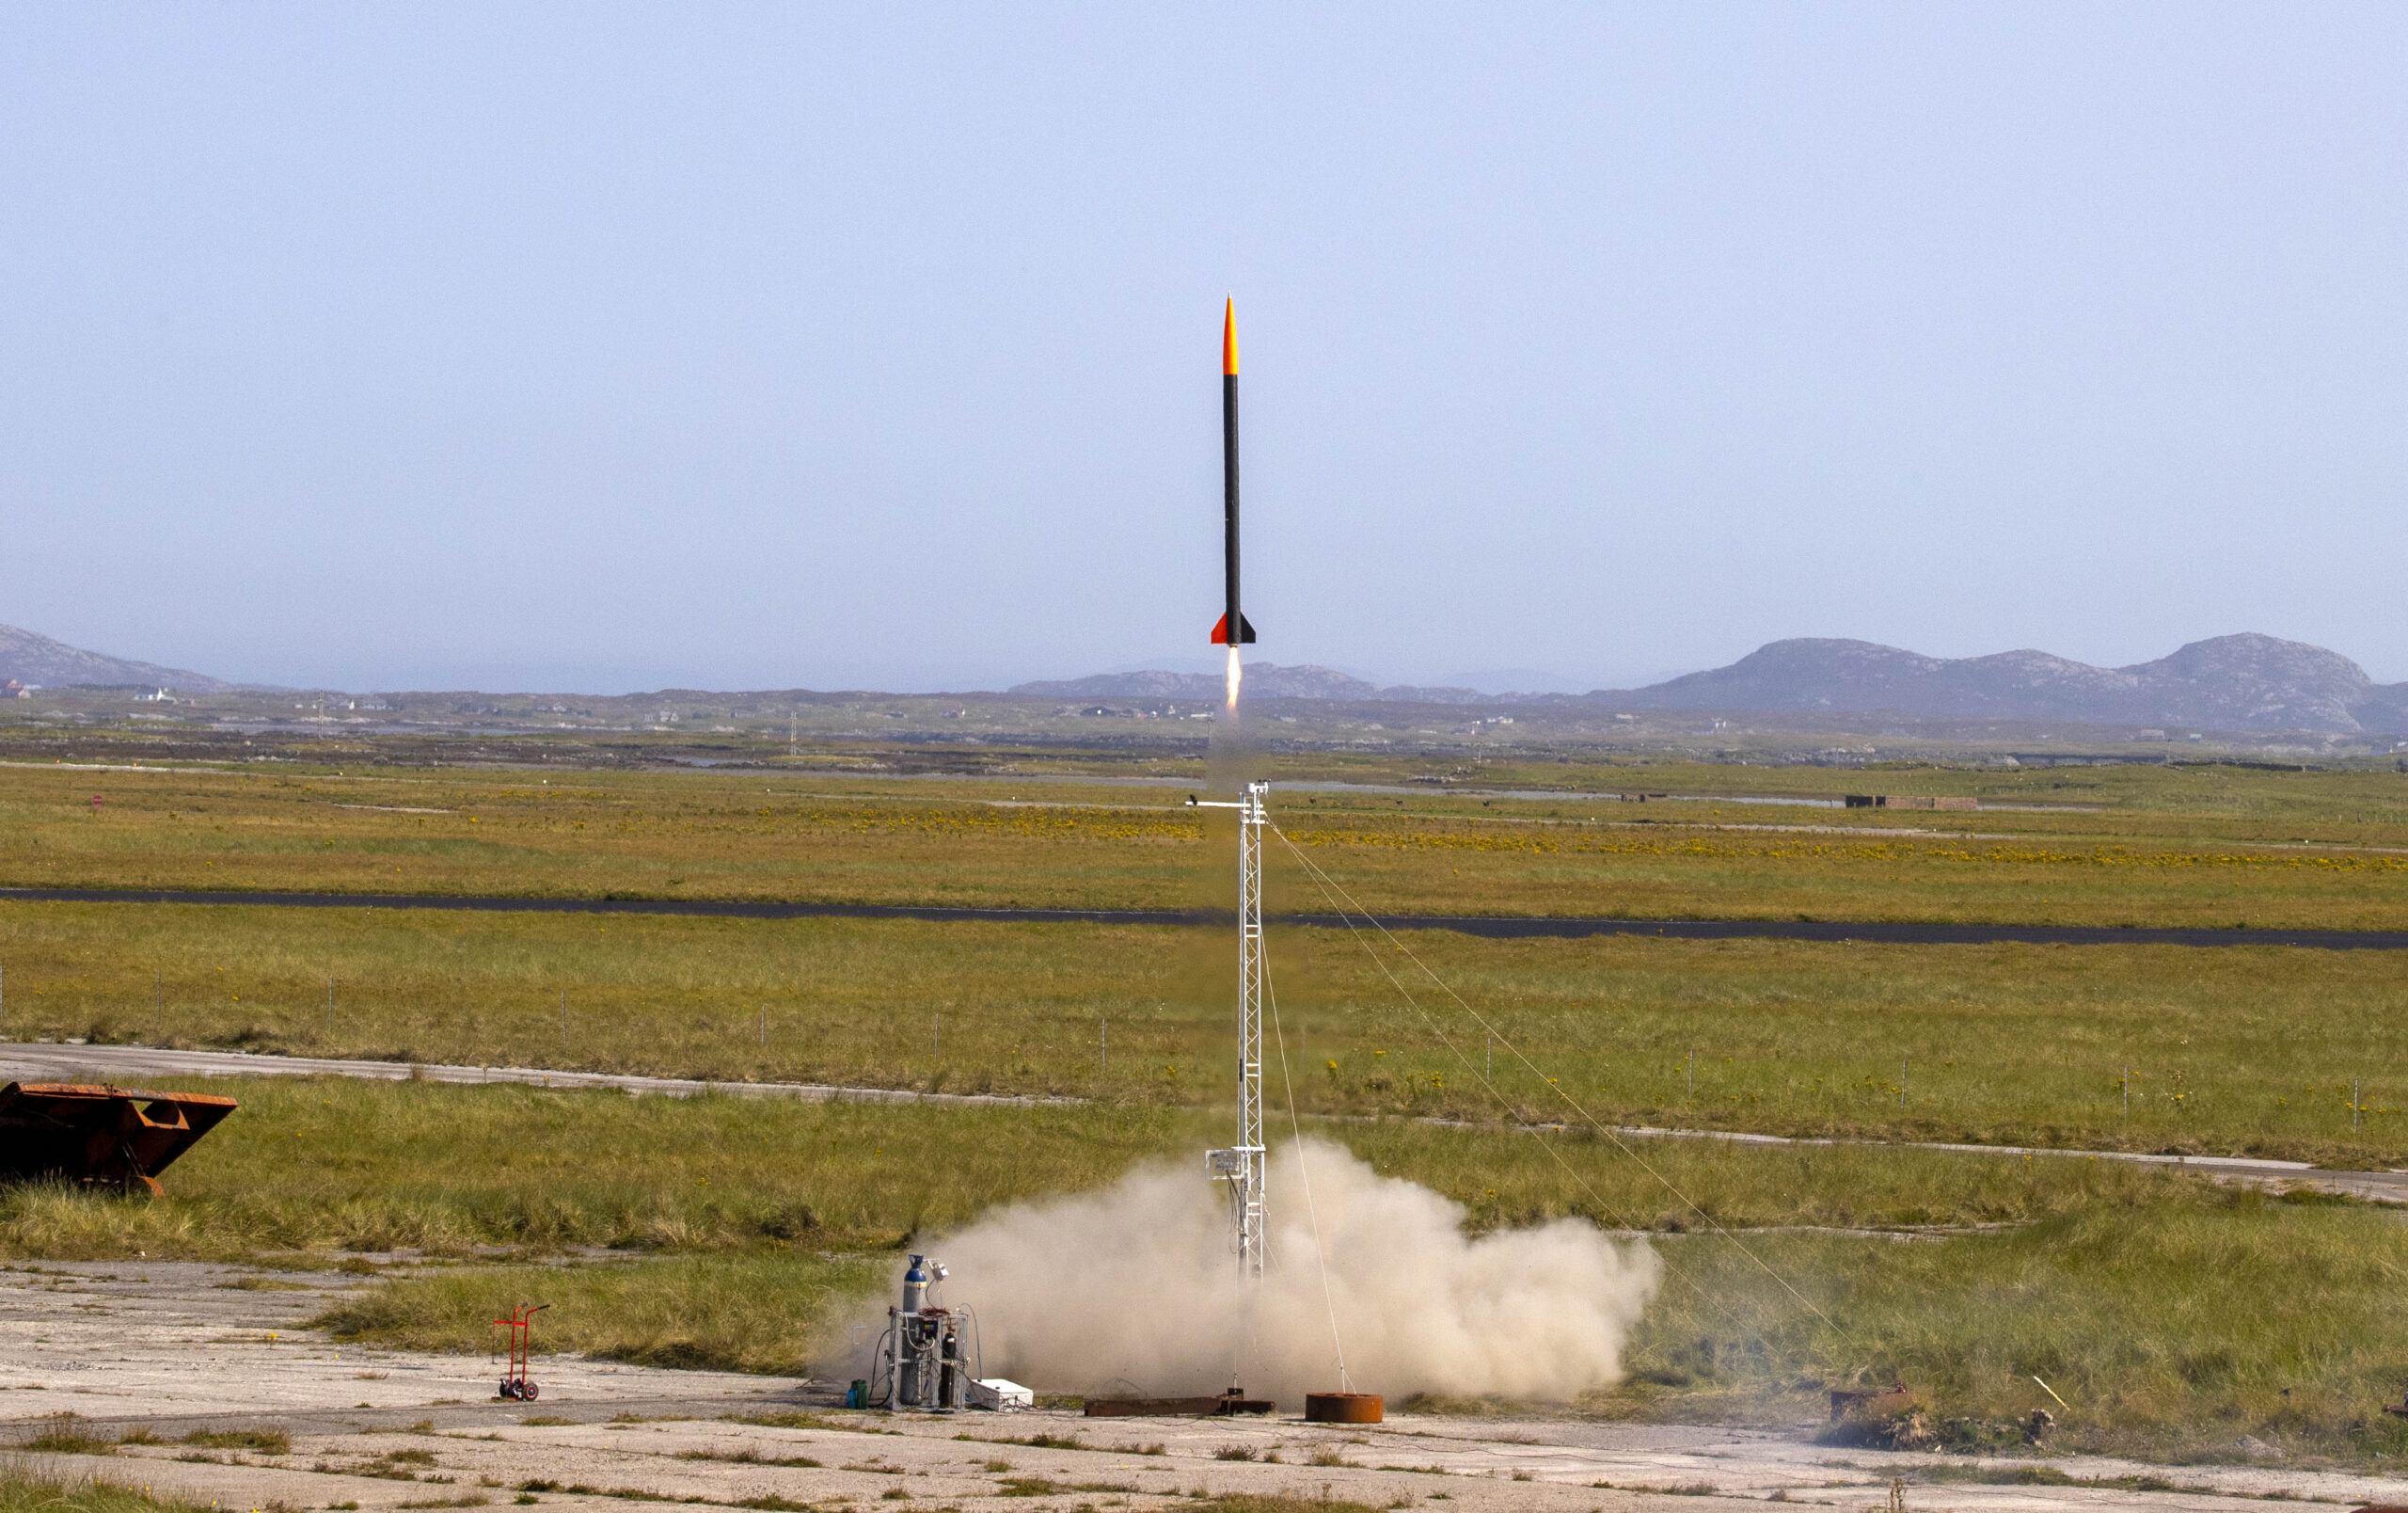 Historic first for UK as commercial rocket launch takes place in Outer Hebrides